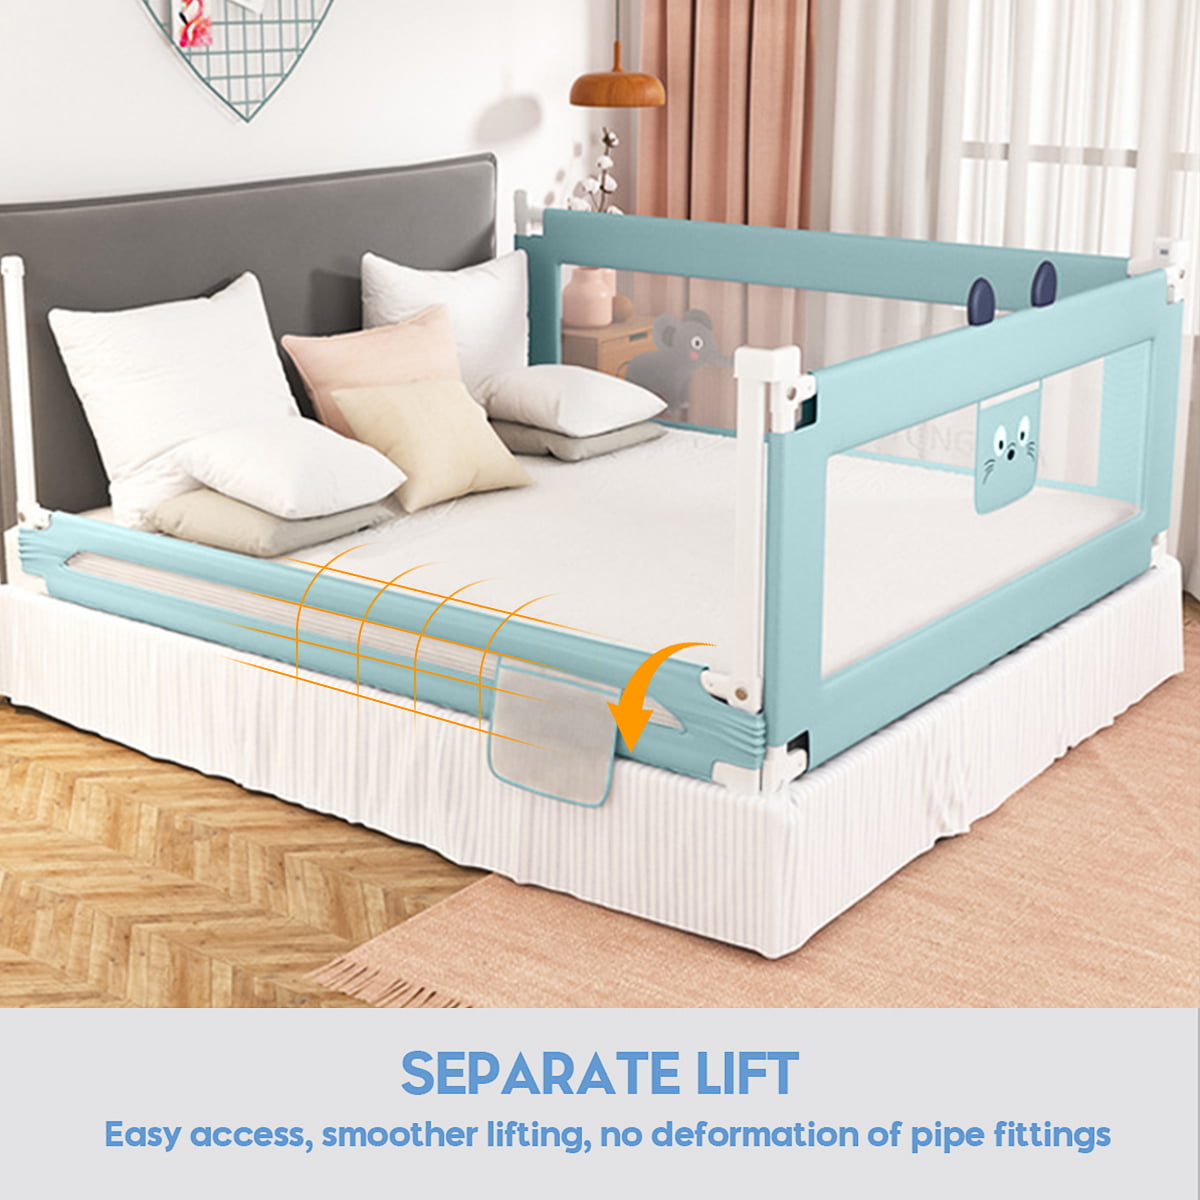 RDHOME 78.7 Bed Rails for Toddlers Vertical Lifting Bed Guardrail for Kids,  Collapsible Baby Bed Rail Guards Fit X-Twin Queen King Size Bed (1 Piece)